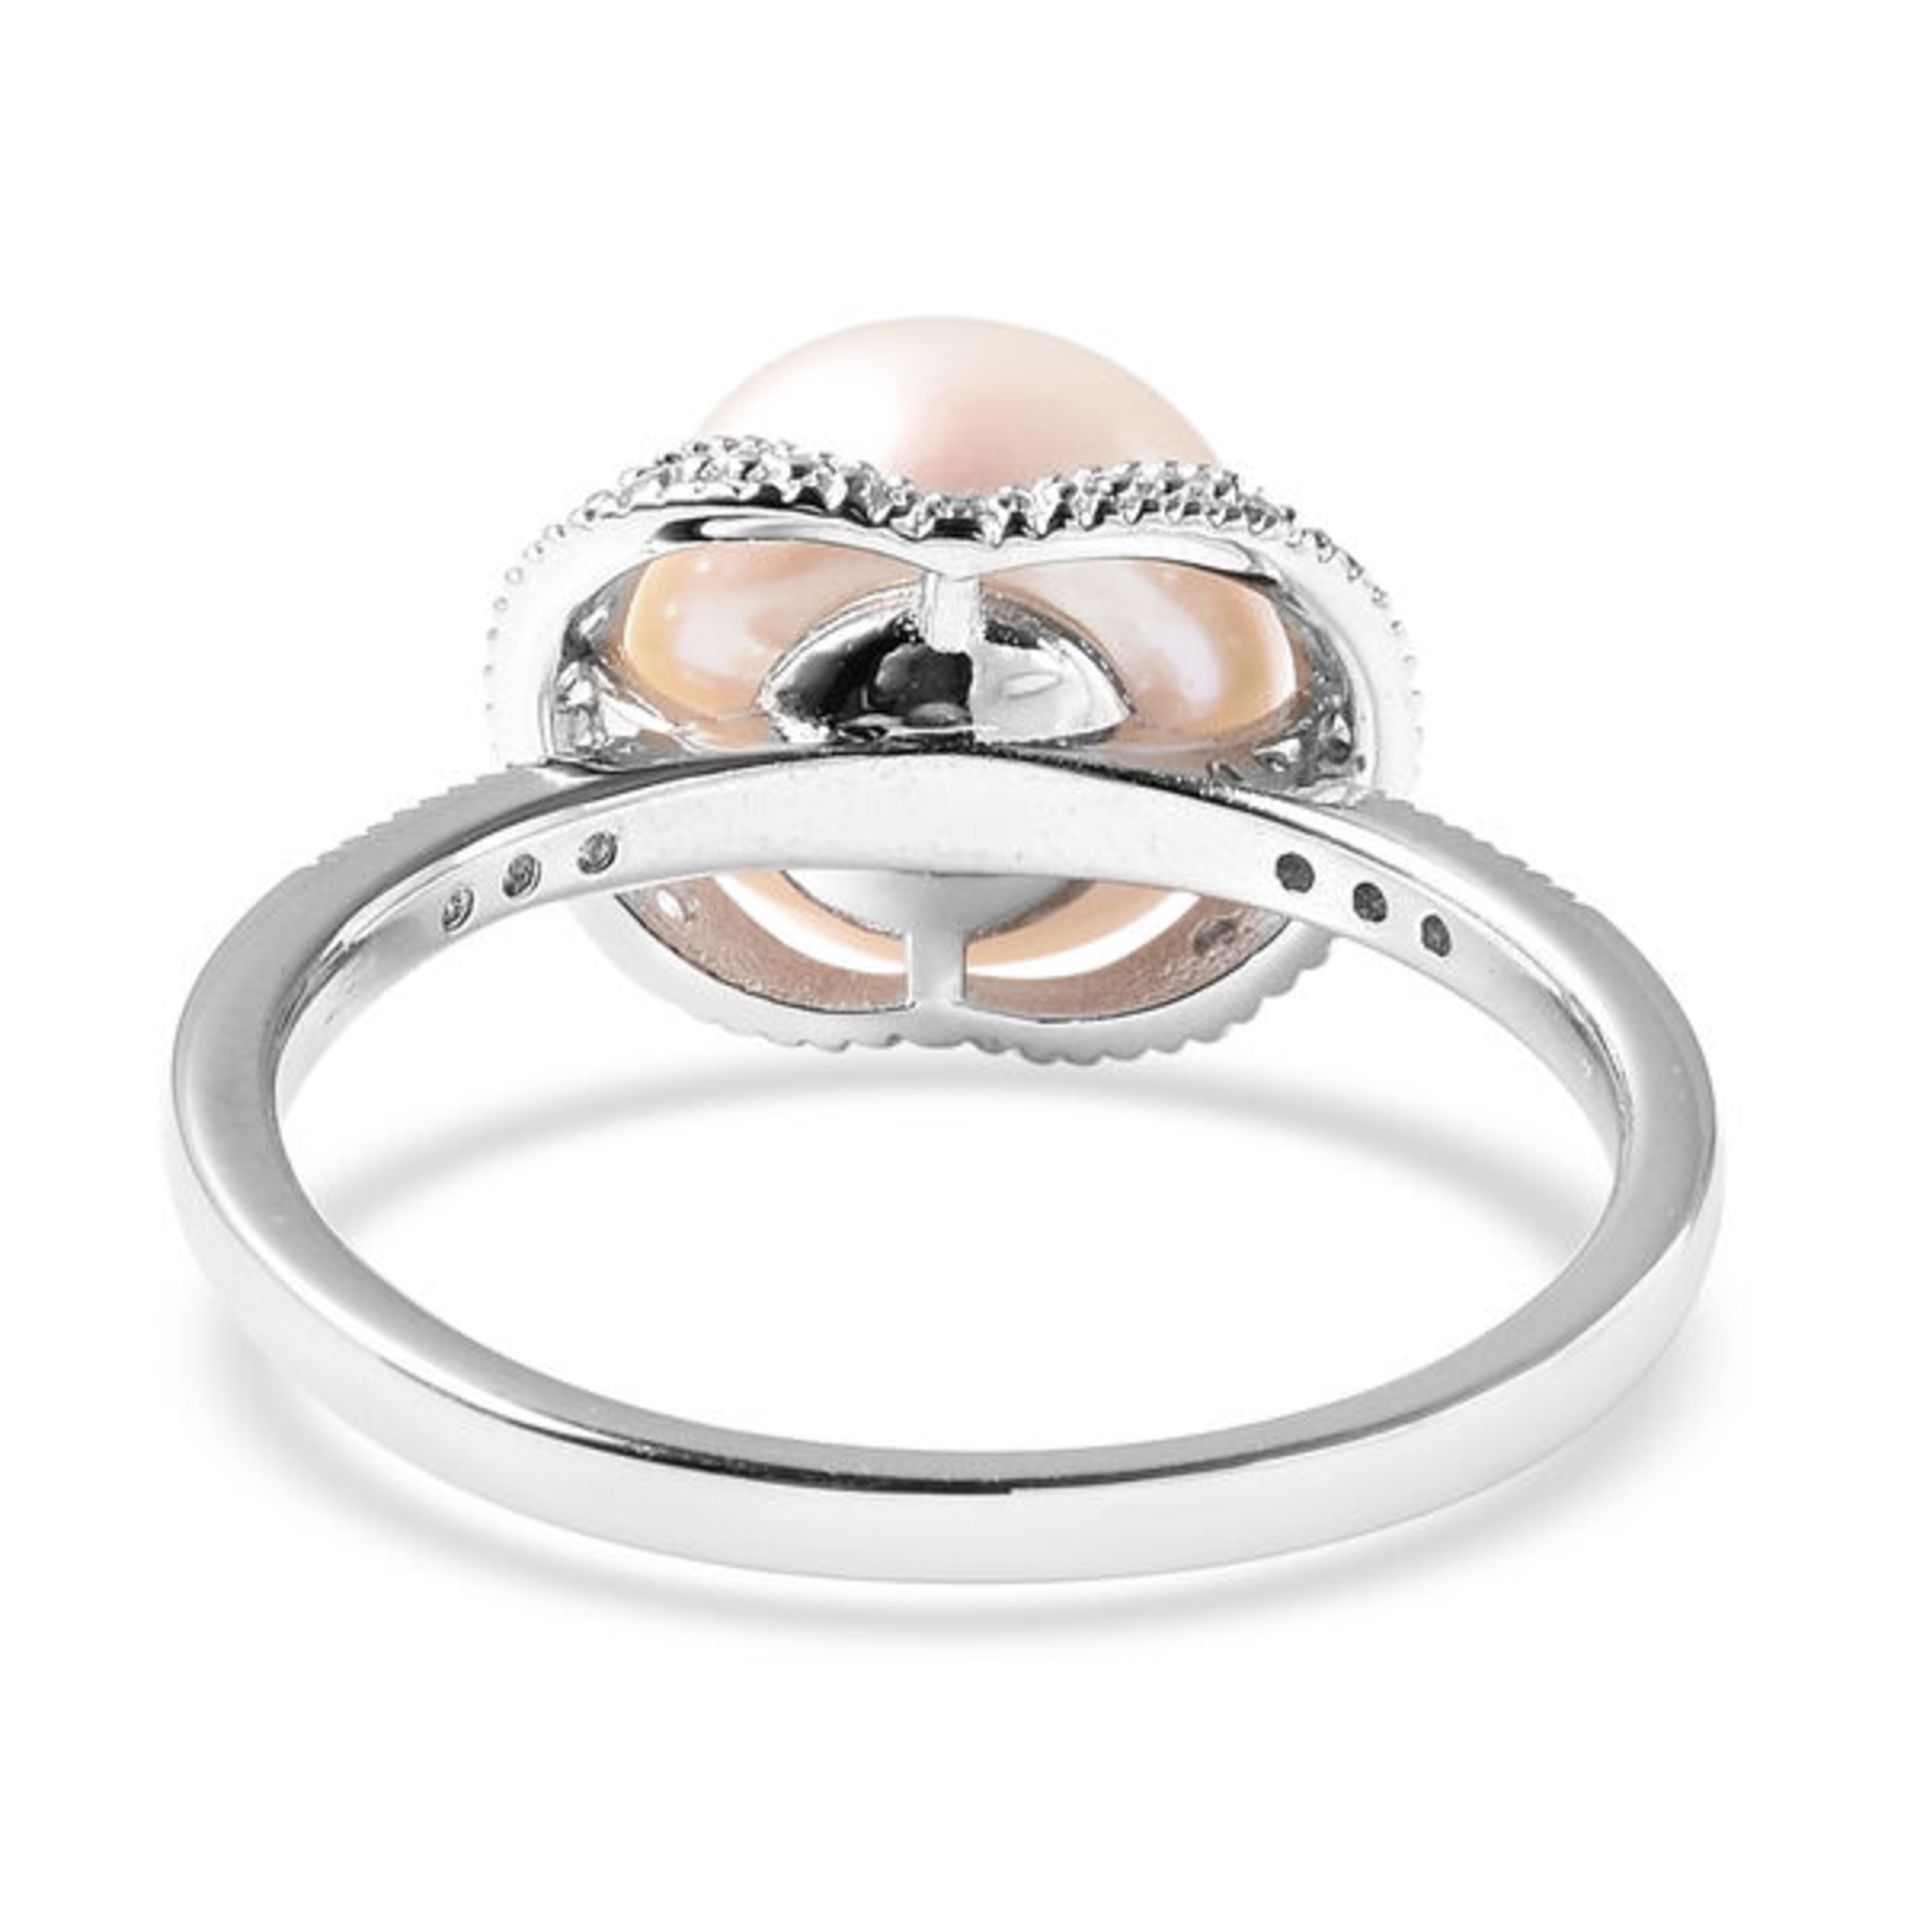 NEW!! Freshwater White Pearl and Simulated Diamond Ring in Rhodium Overlay - Image 3 of 3